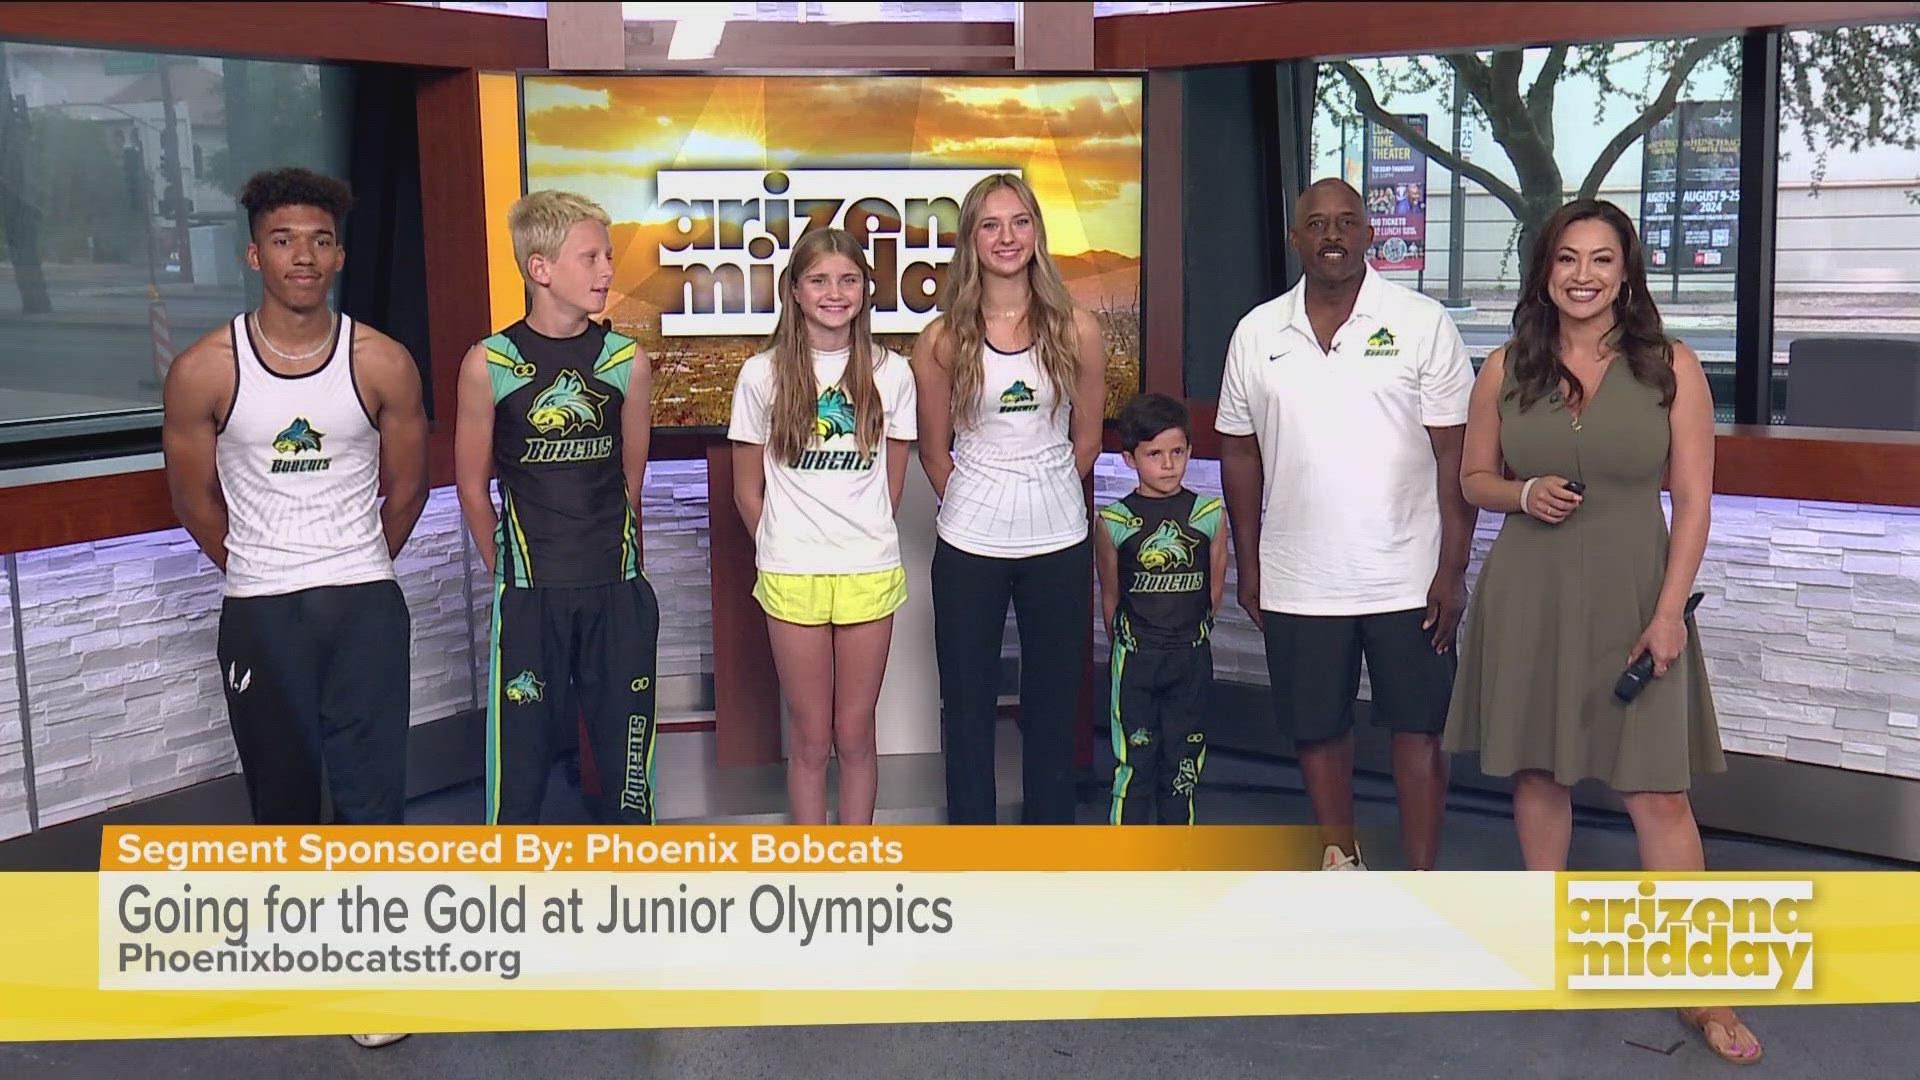 Erwin Jones, Head Coach of Phoenix Bobcats, and his team stop by to talk about the club plus athletes competing in the Junior Olympics.